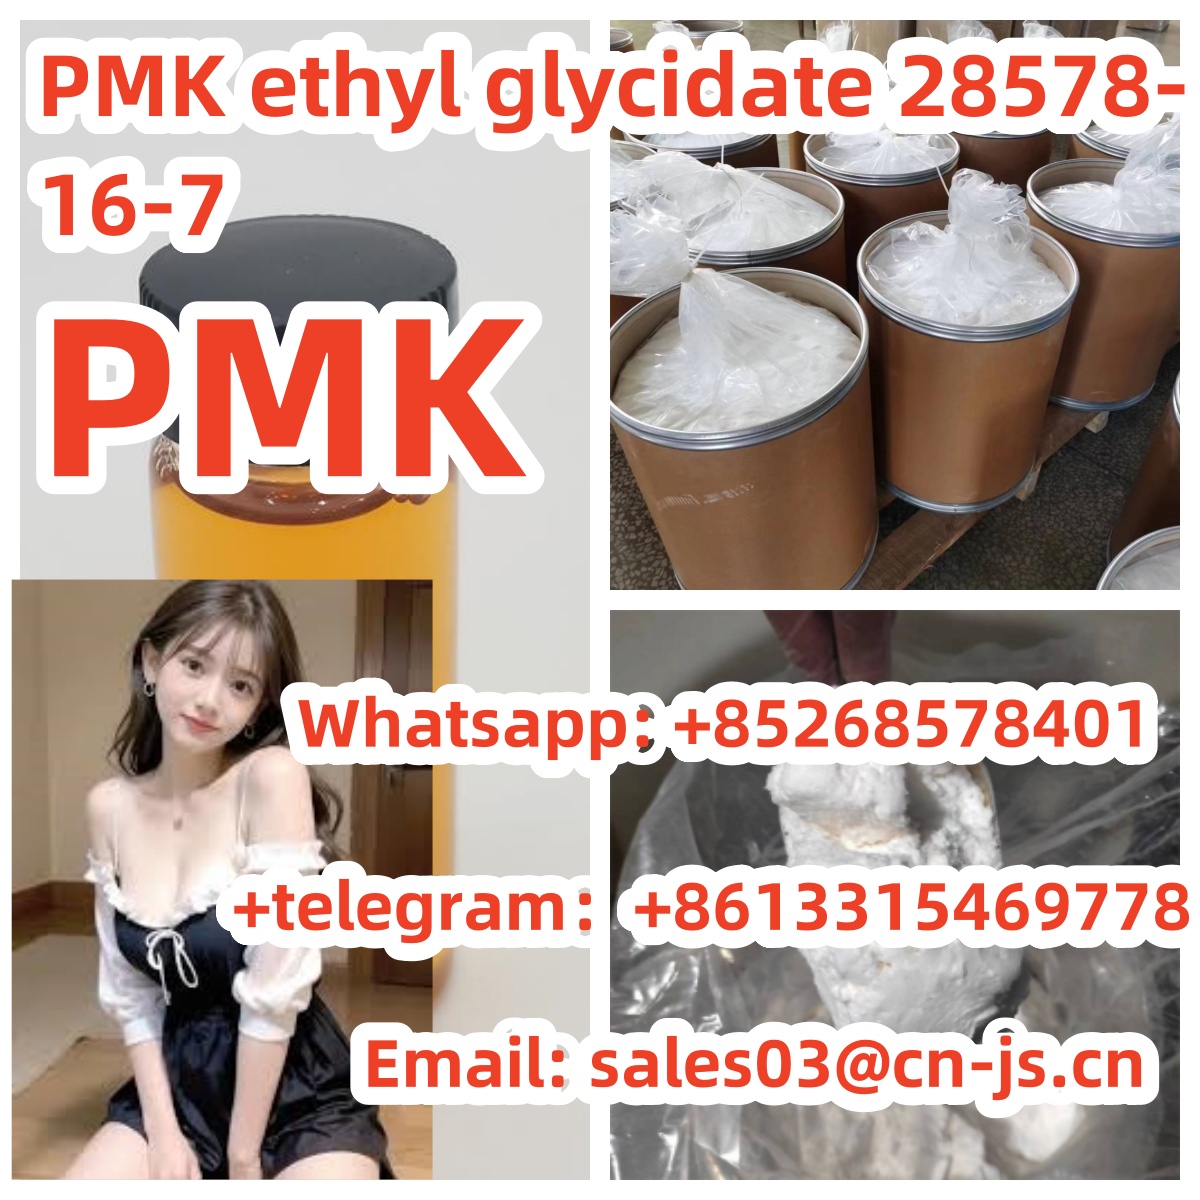 lowest price PMK ethyl glycidate 28578-16-7 ,111,Pets,Free Classifieds,Post Free Ads,77traders.com